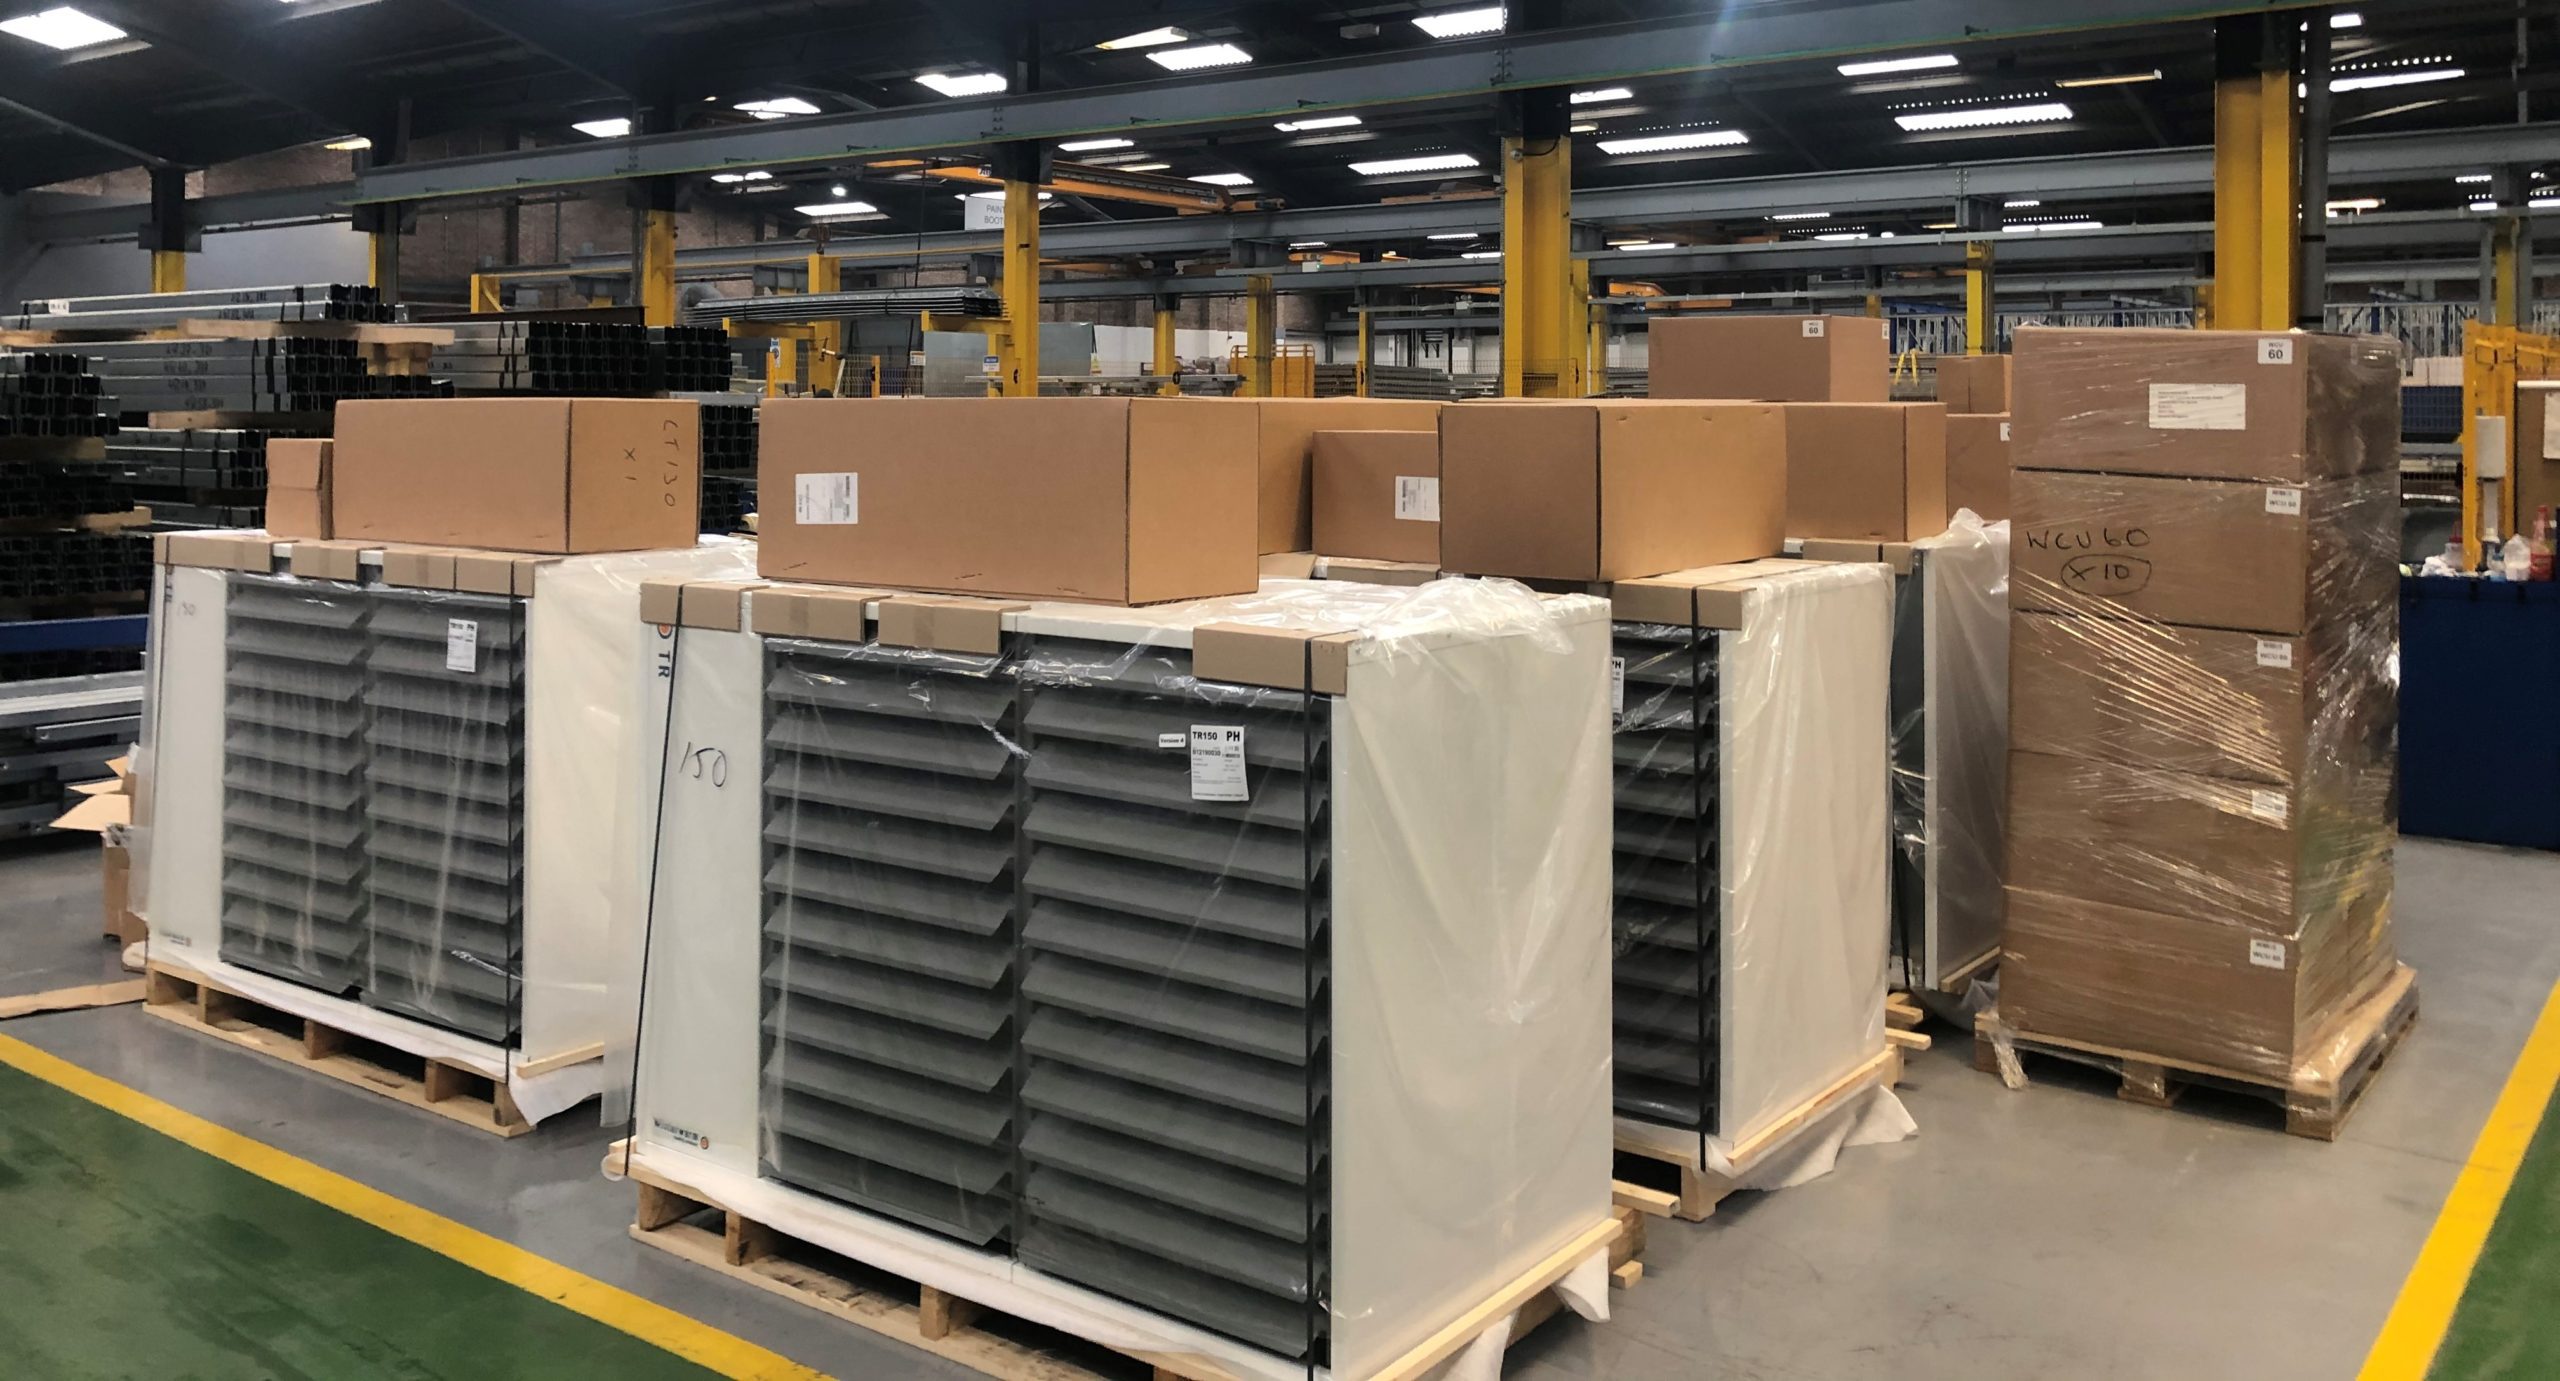 Warm air heating units for Sigmat warehouse space